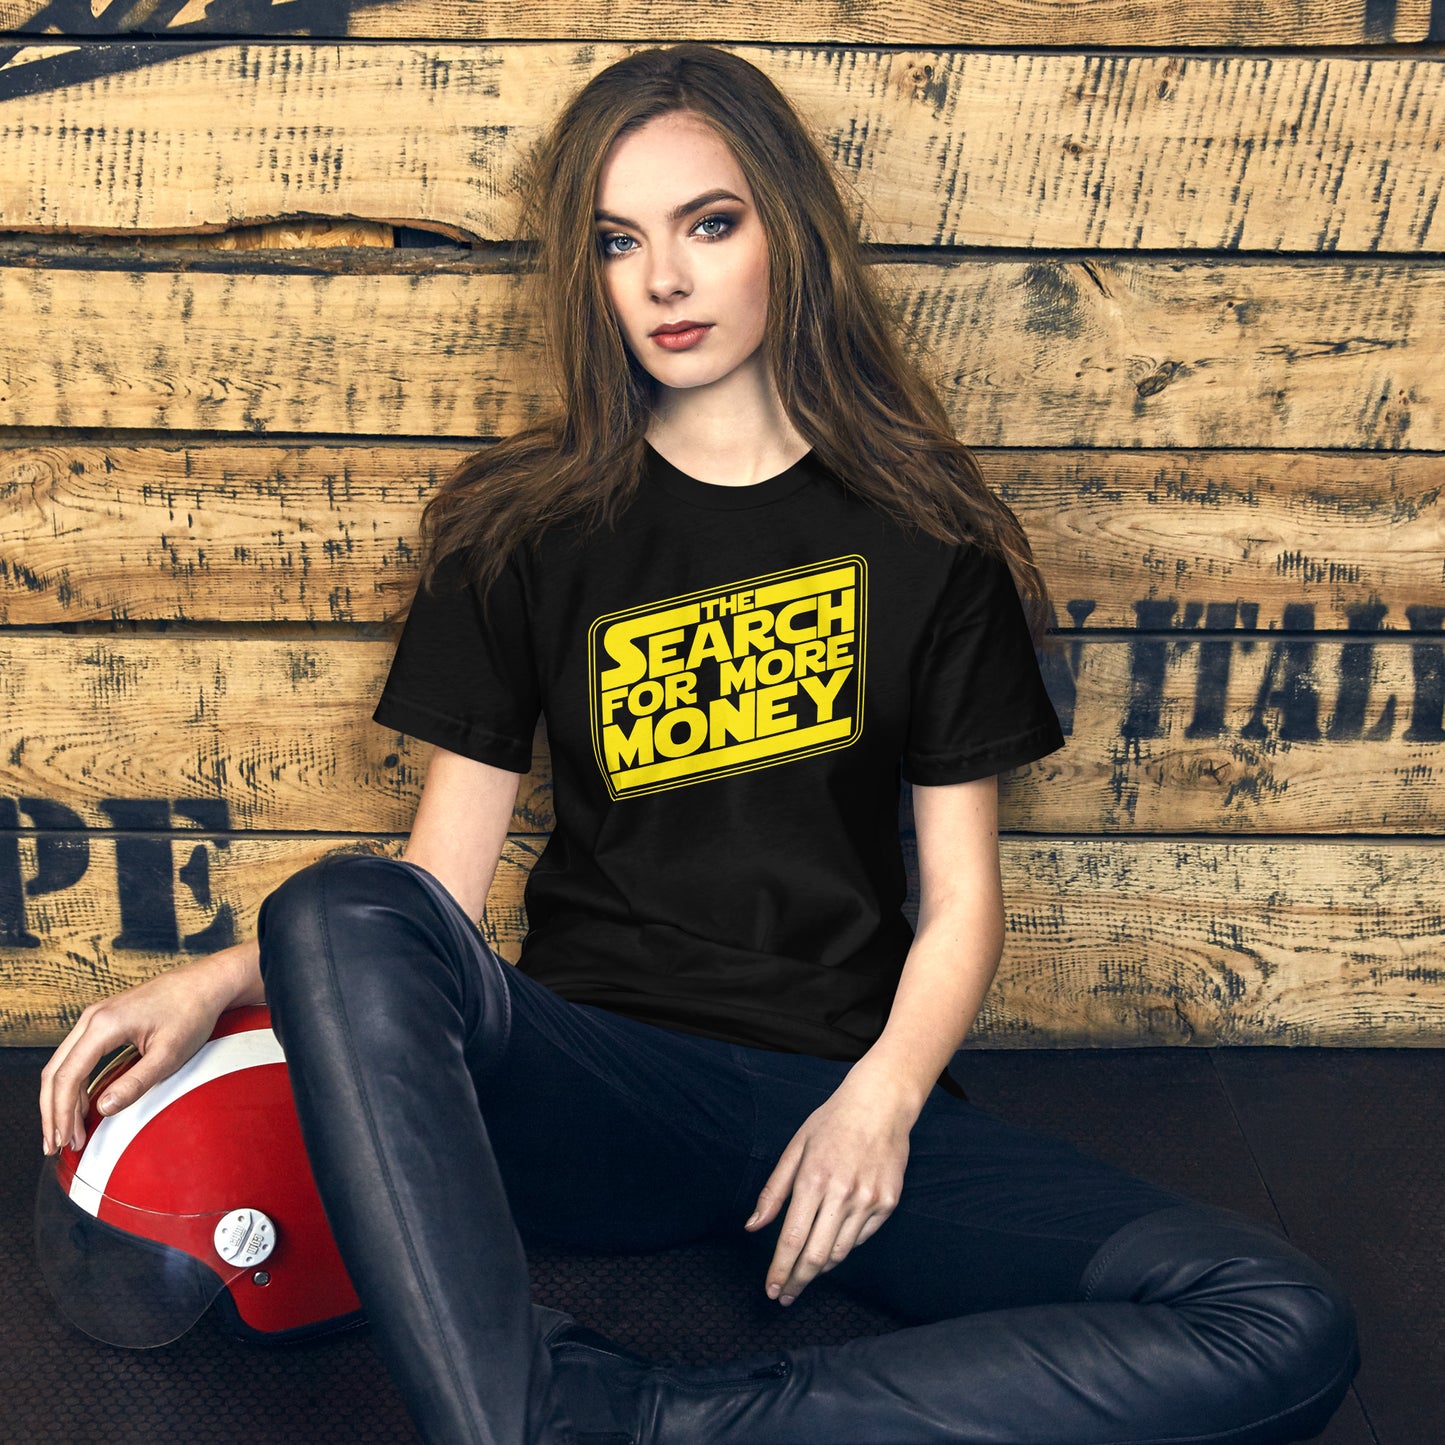 The Search For More Money Short-Sleeve Unisex T-Shirt Black Mockup